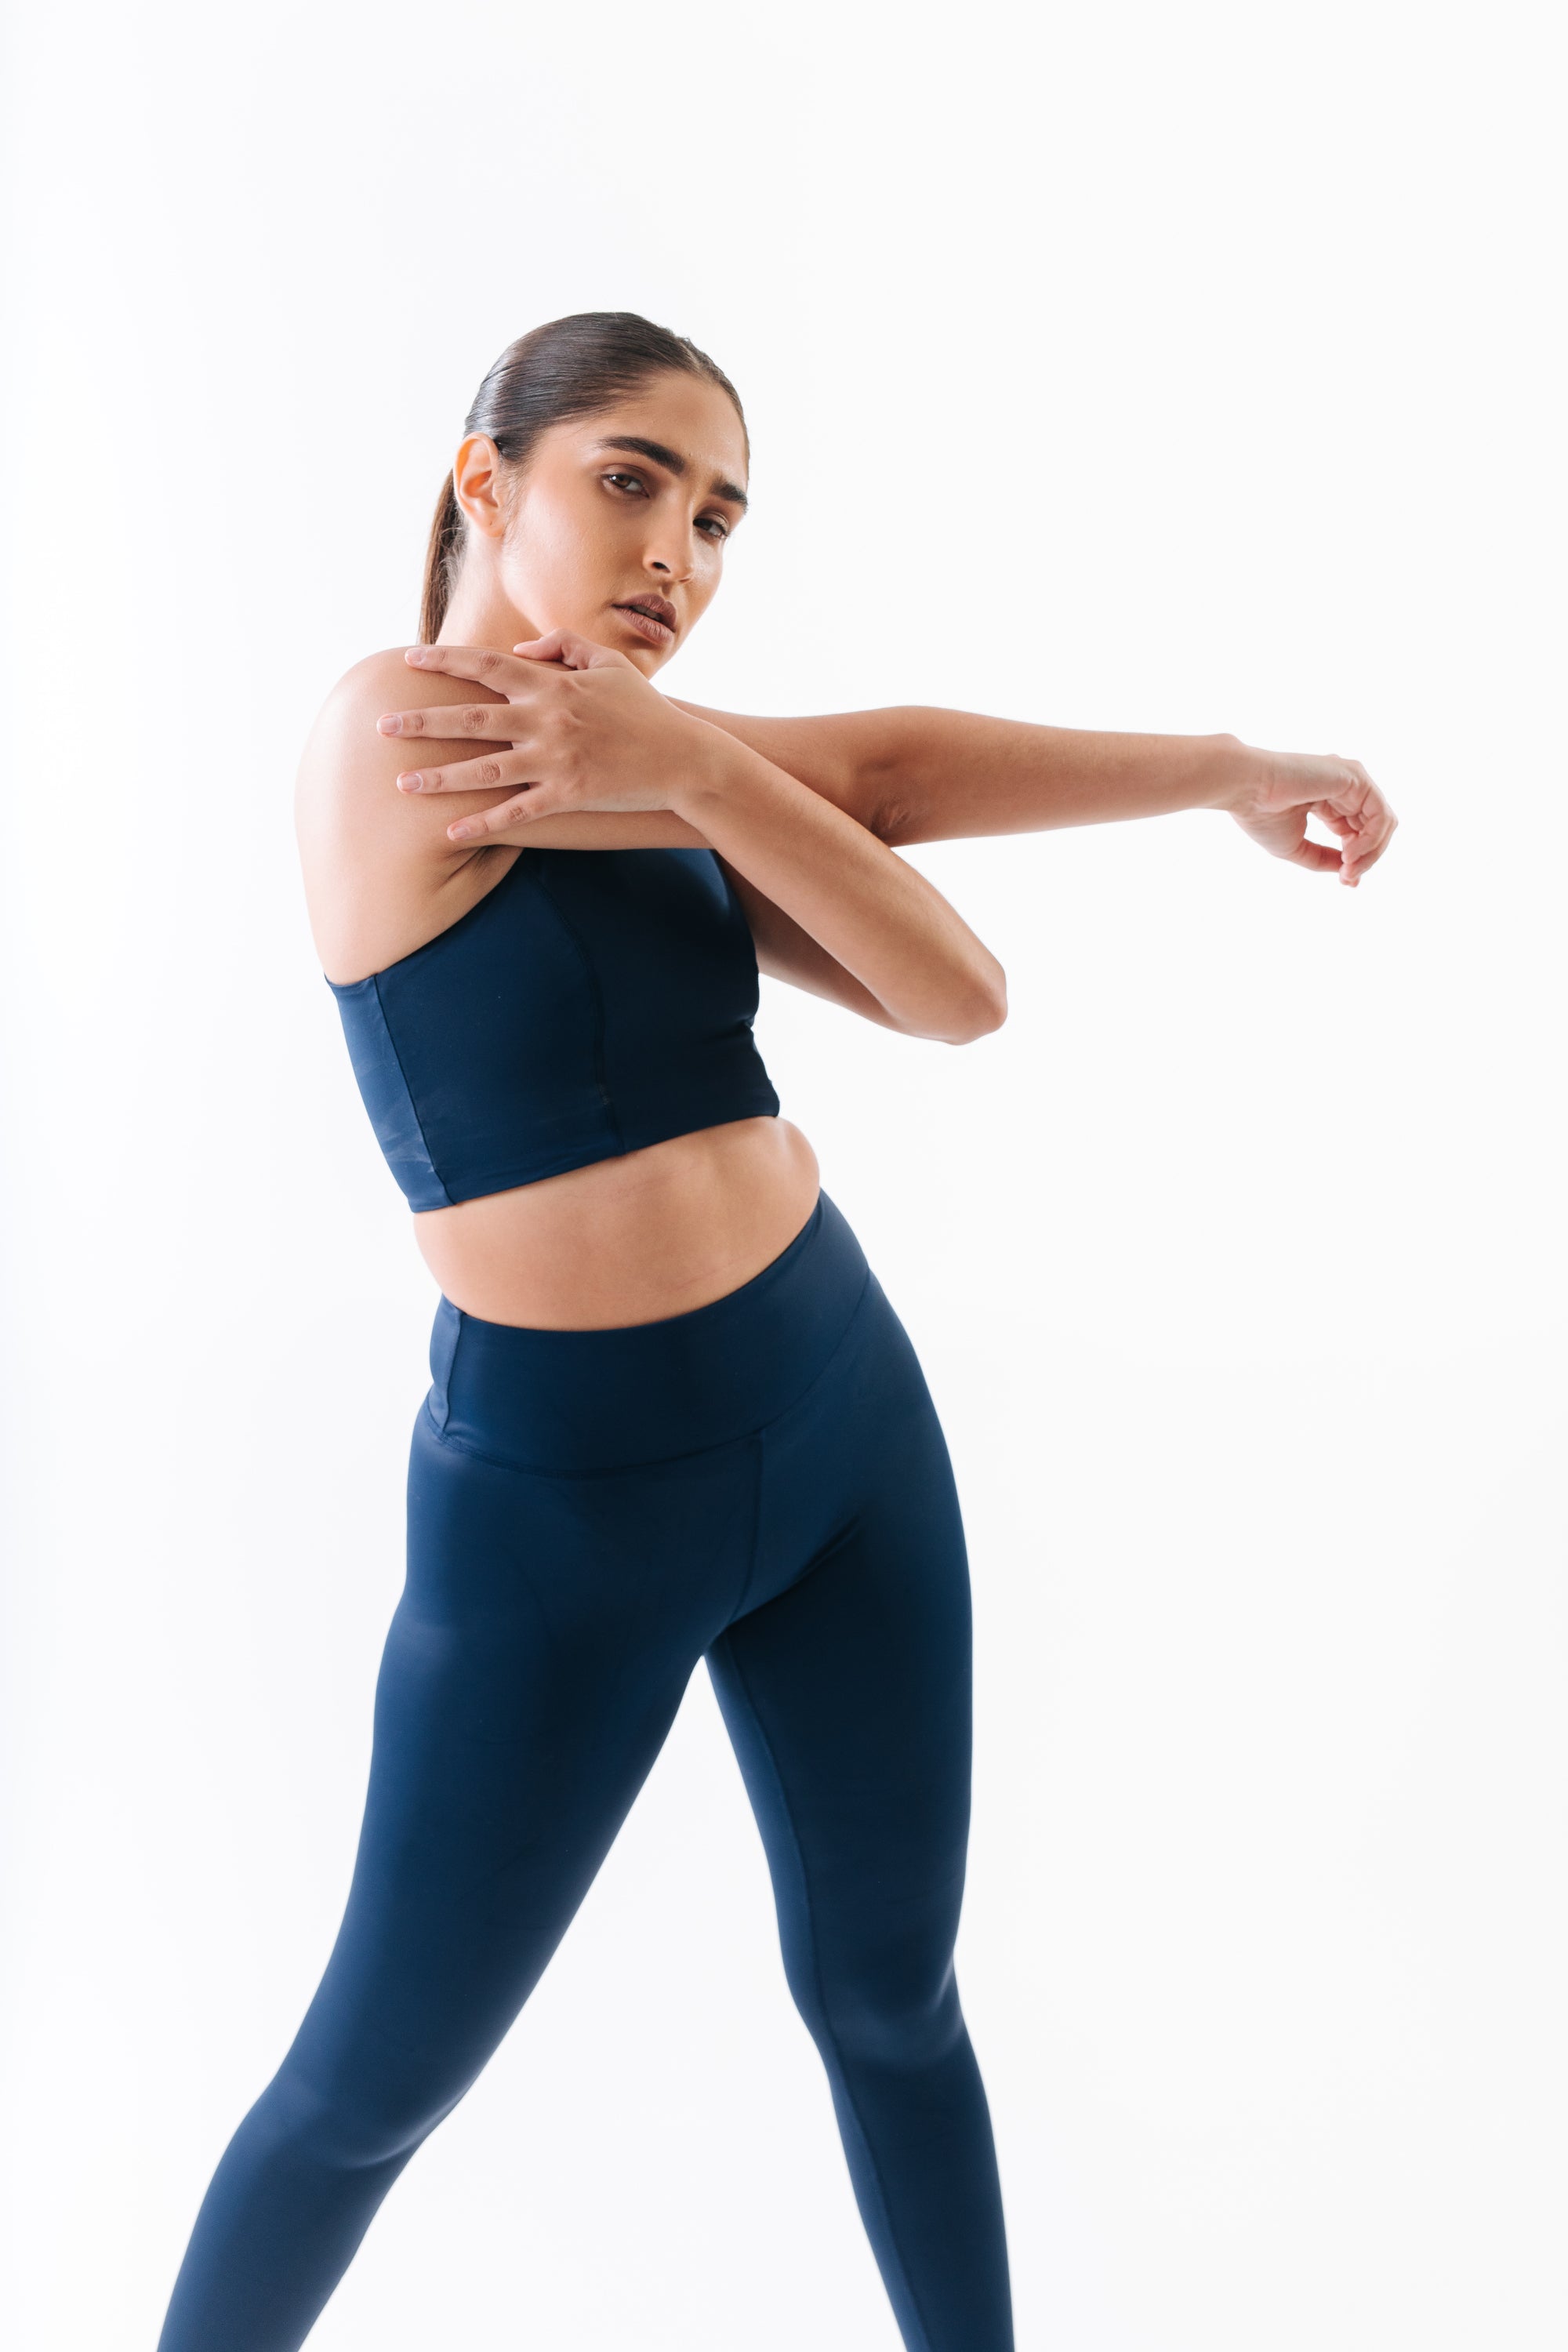 Women's Activewear From Target That Reviewers Love | HuffPost Life